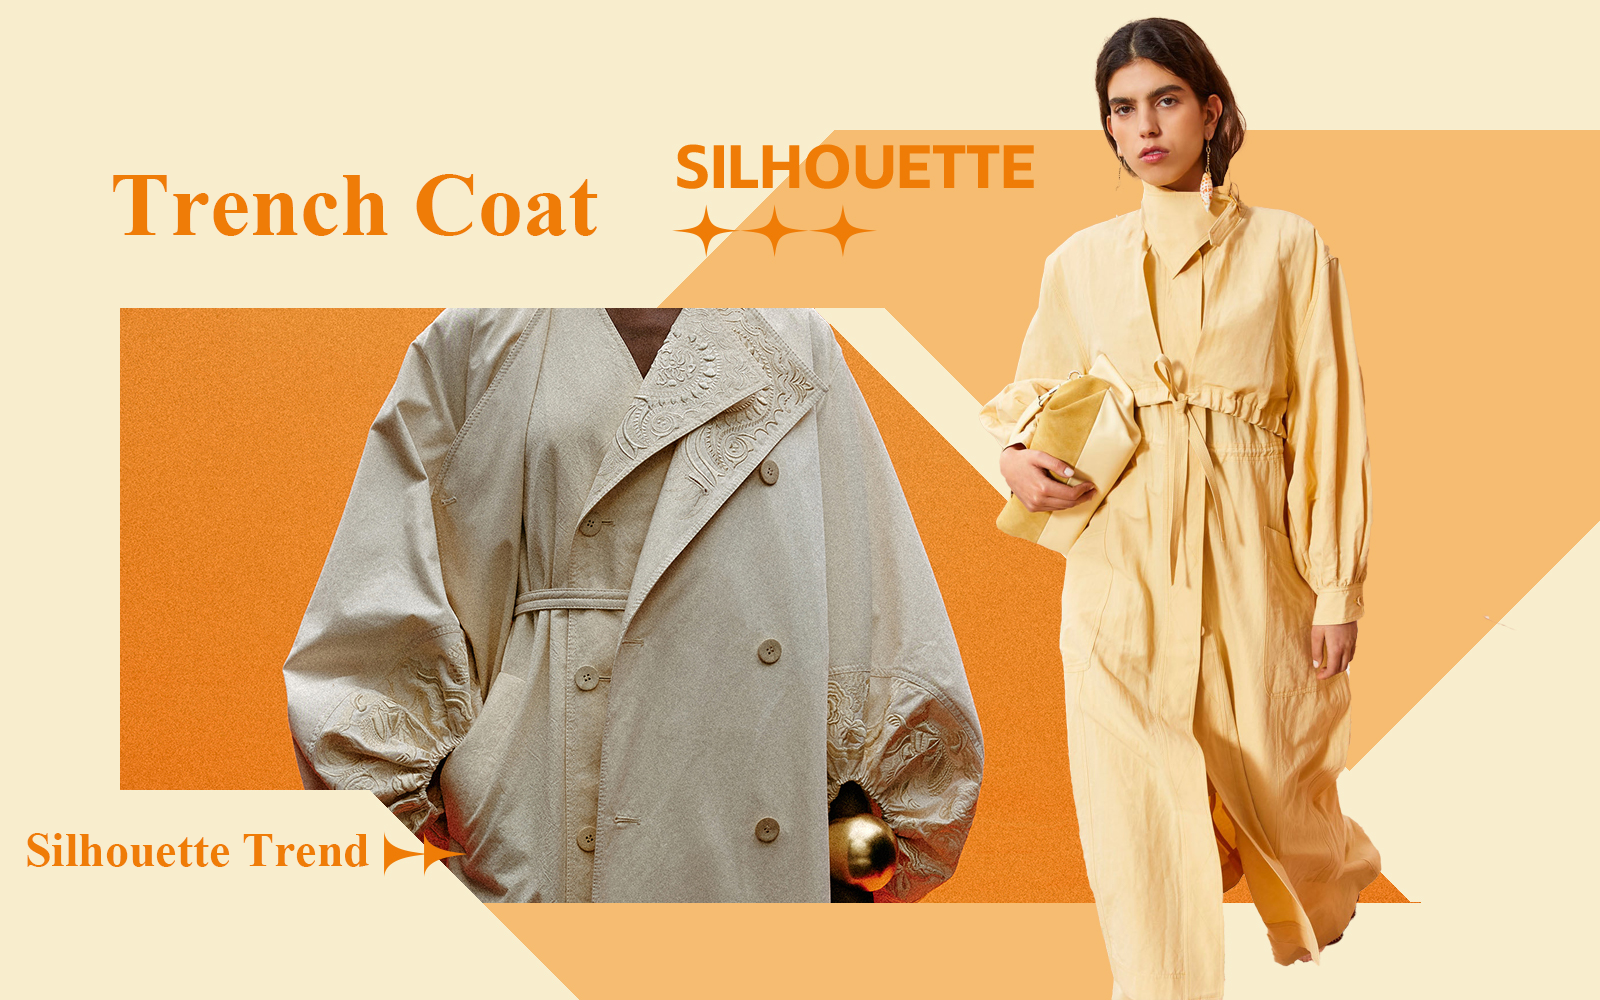 The Silhouette Trend for Women's Trench Coat